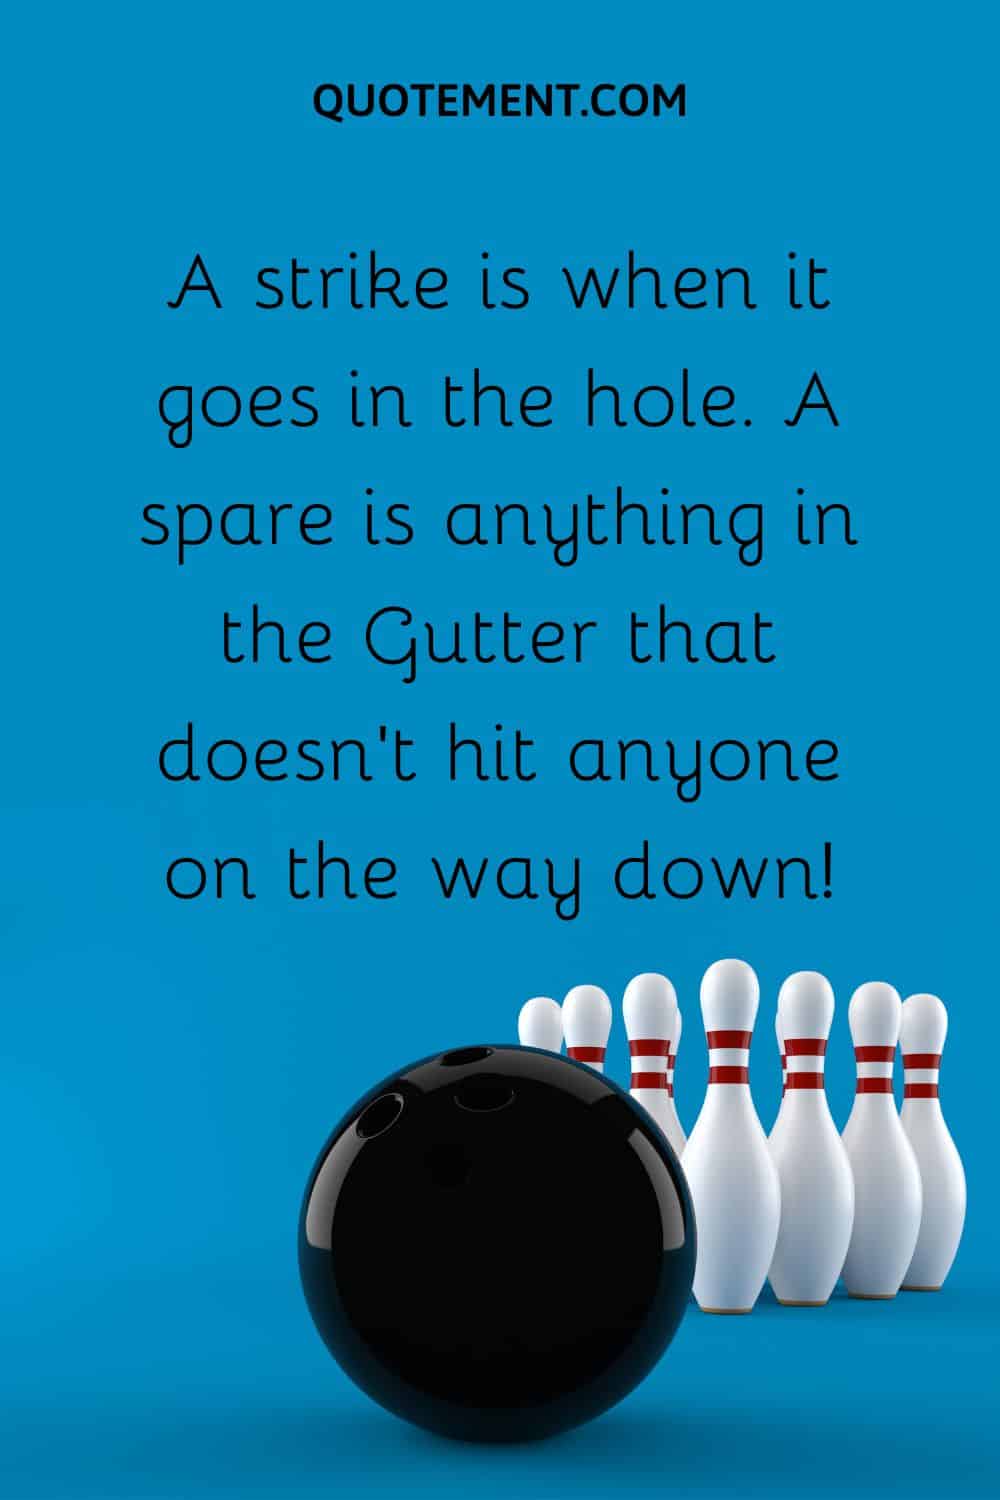 A strike is when it goes in the hole